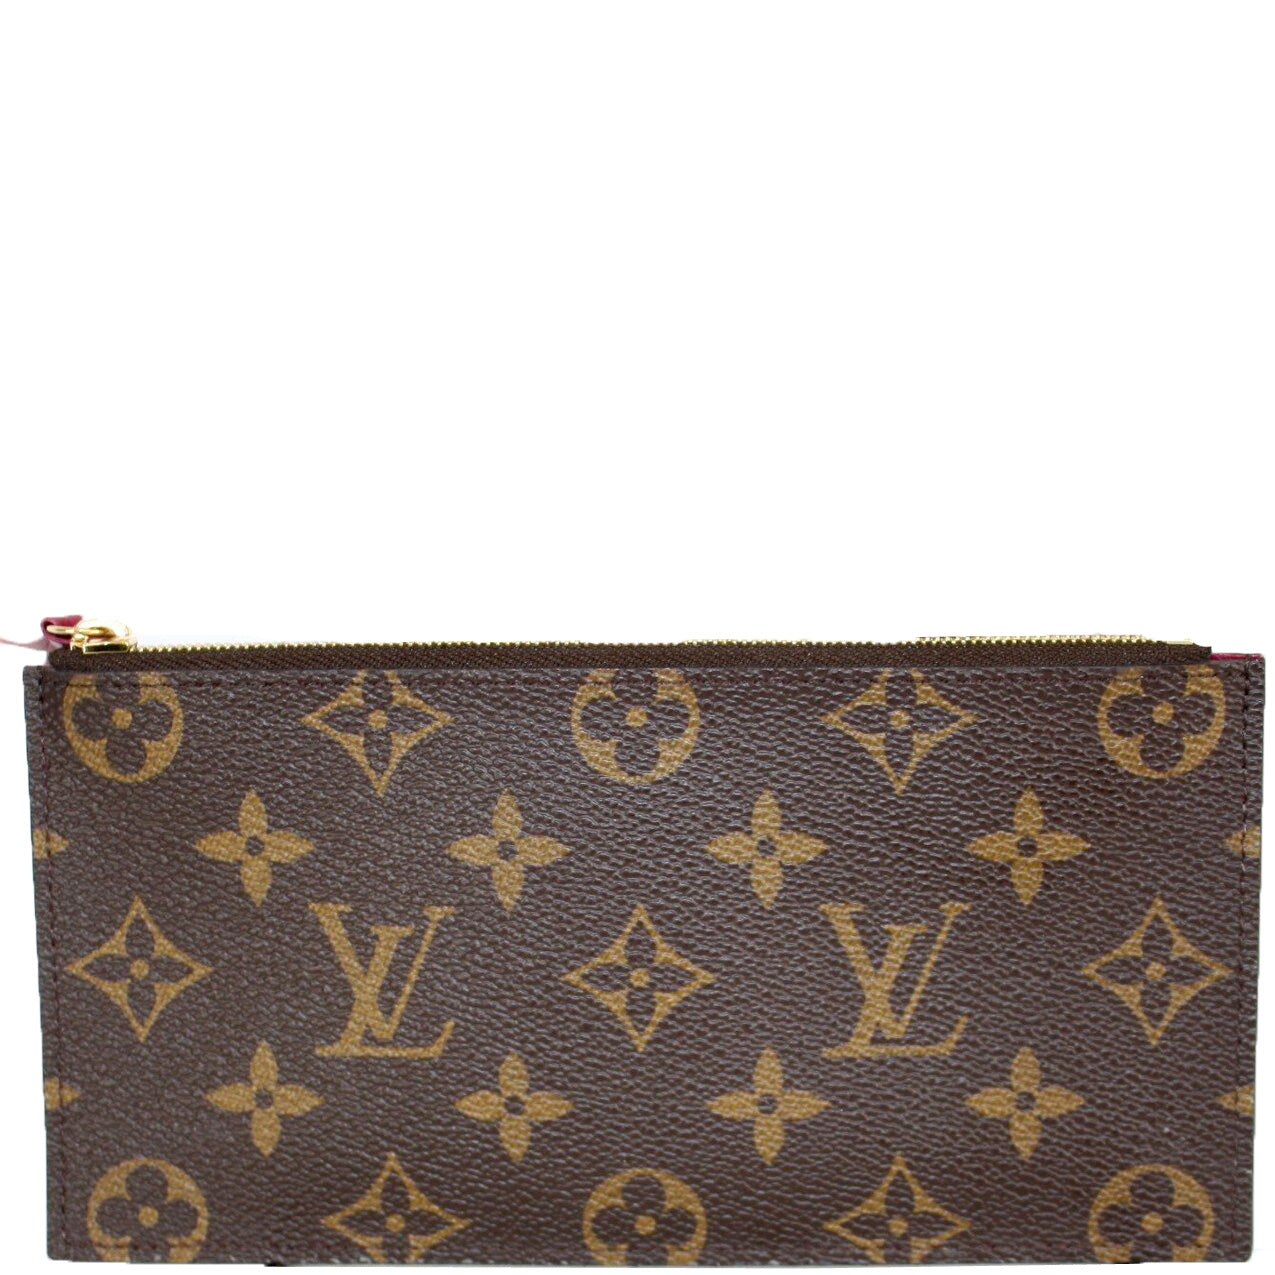 Pochette Felicie nearly 2 years of wear and tear review! My thoughts on the  bag. 